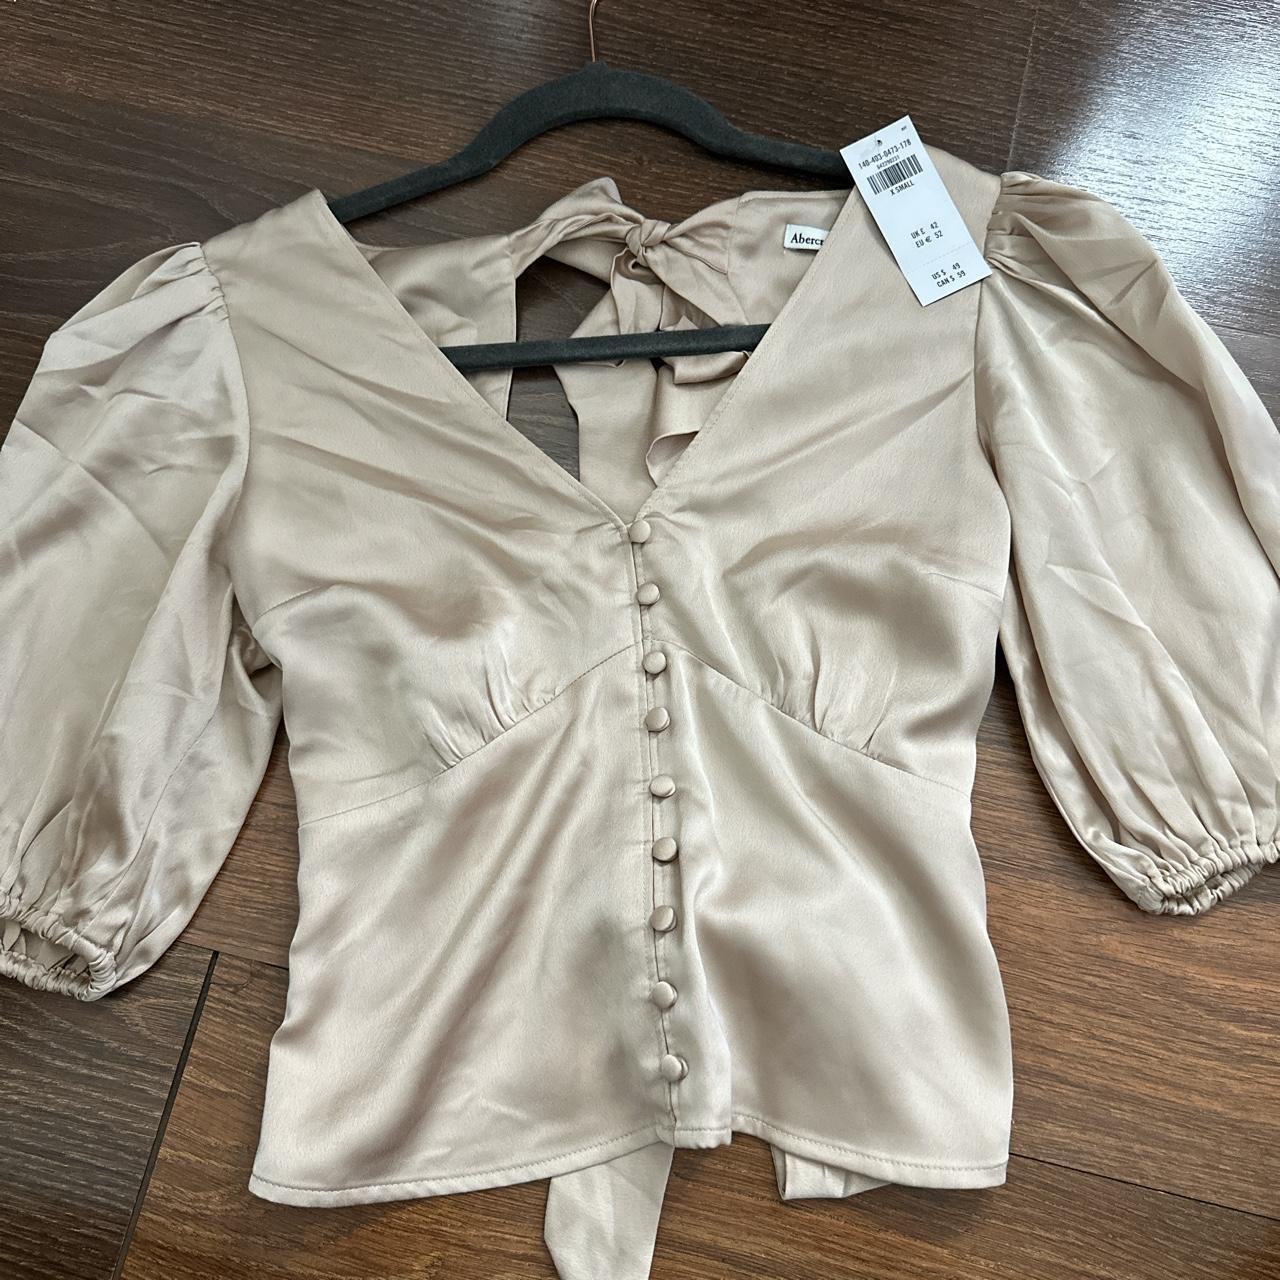 Abercrombie satin top in champagne color with open...